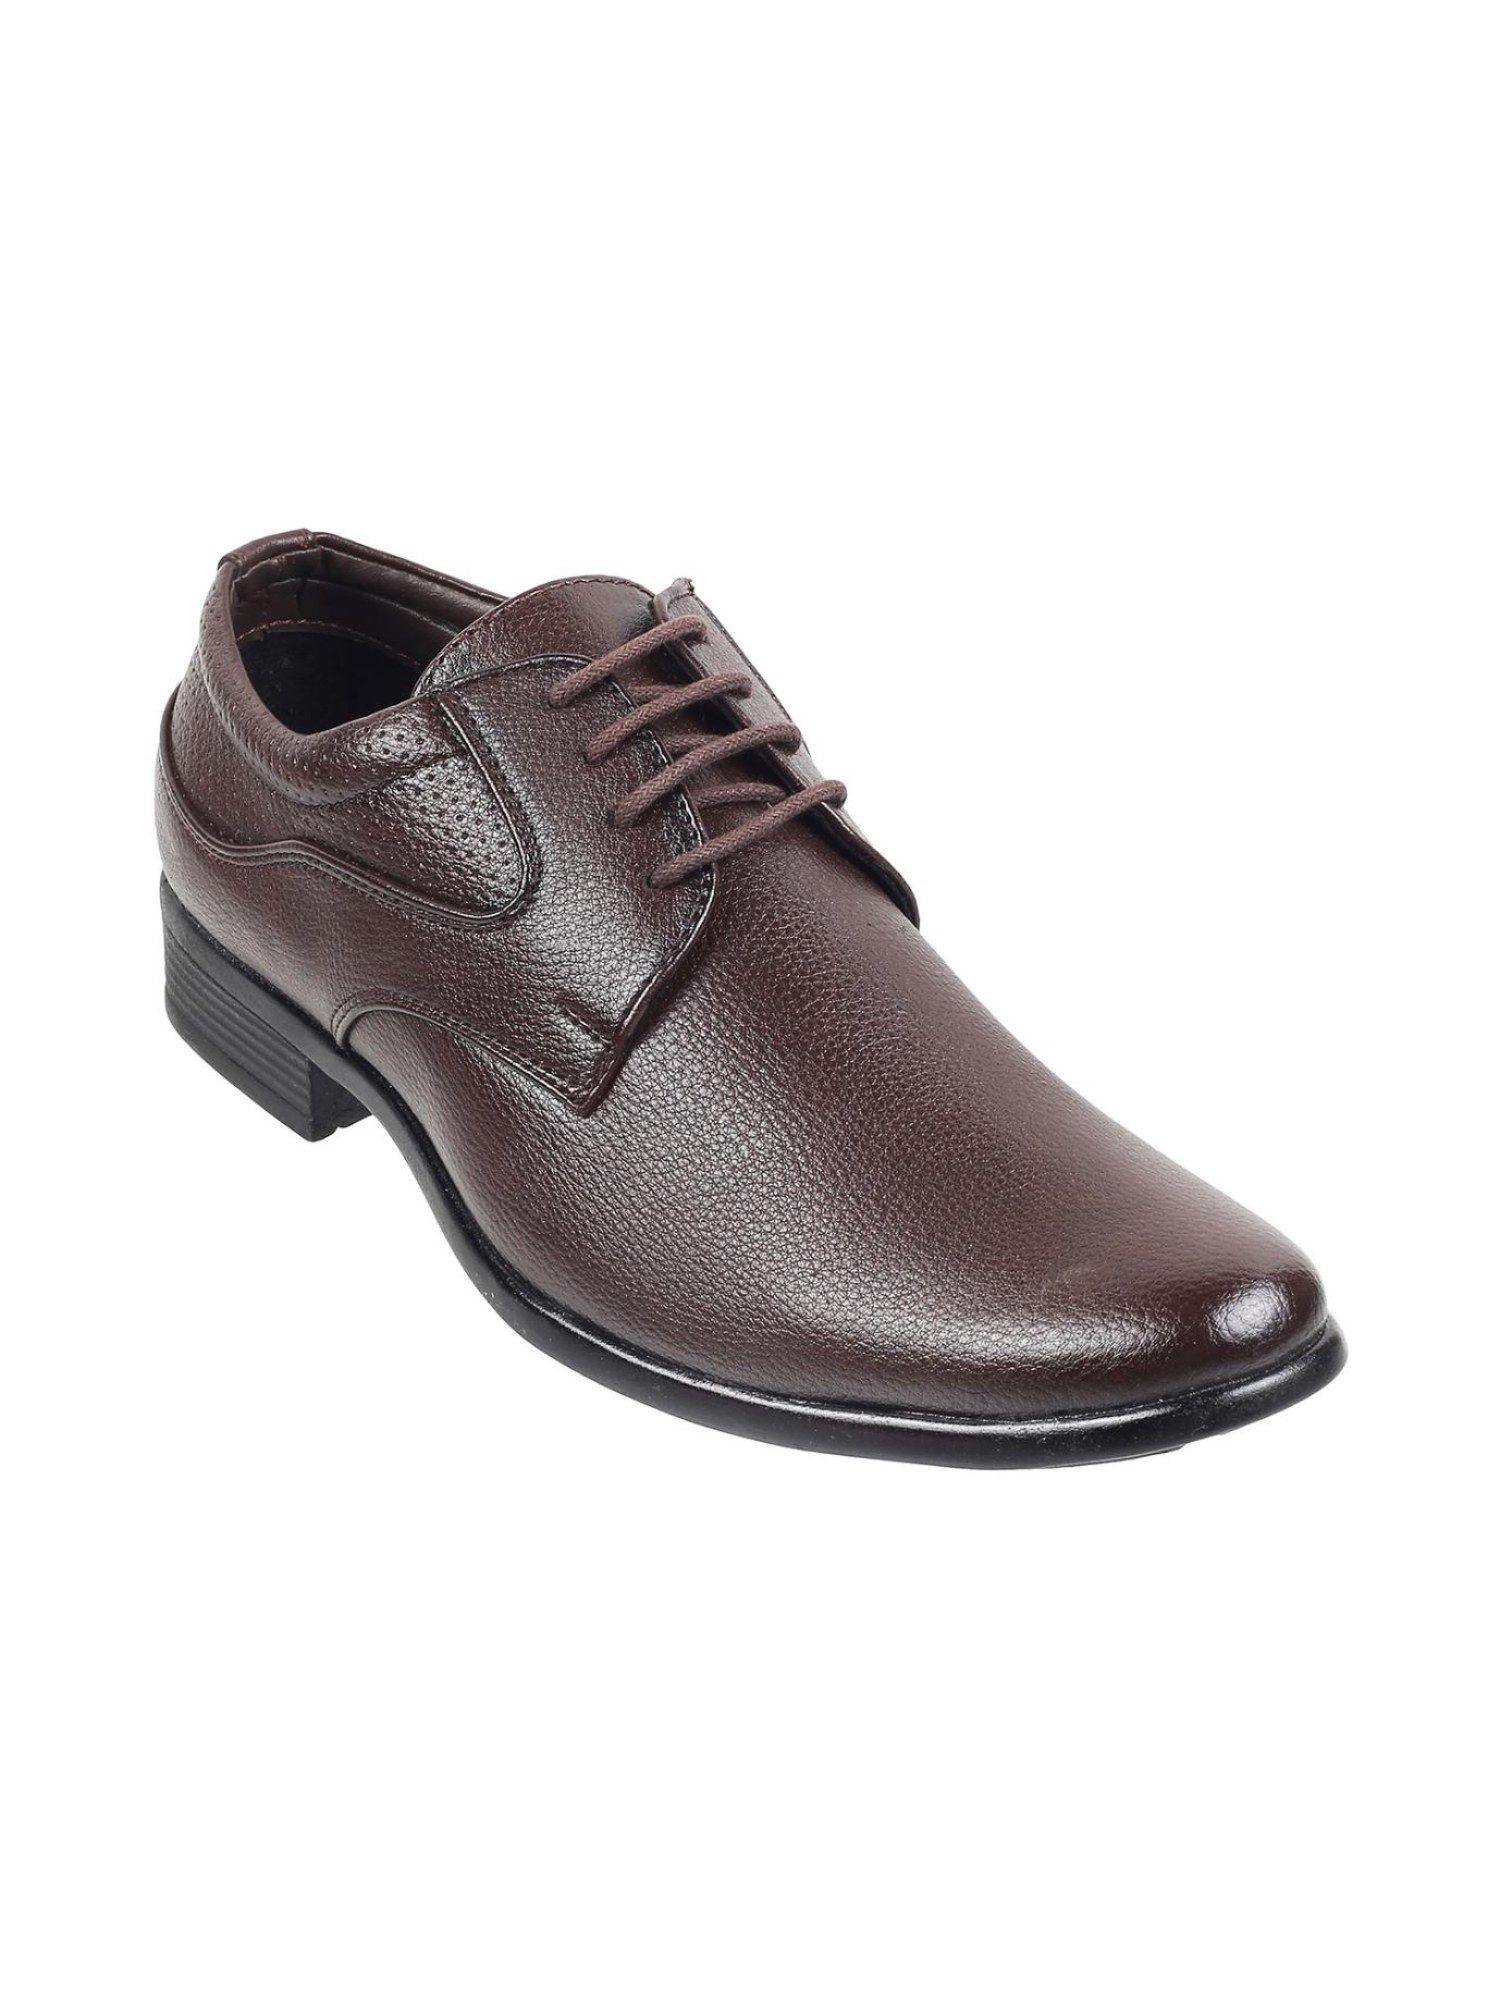 men brown faux leather formal oxfords shoes